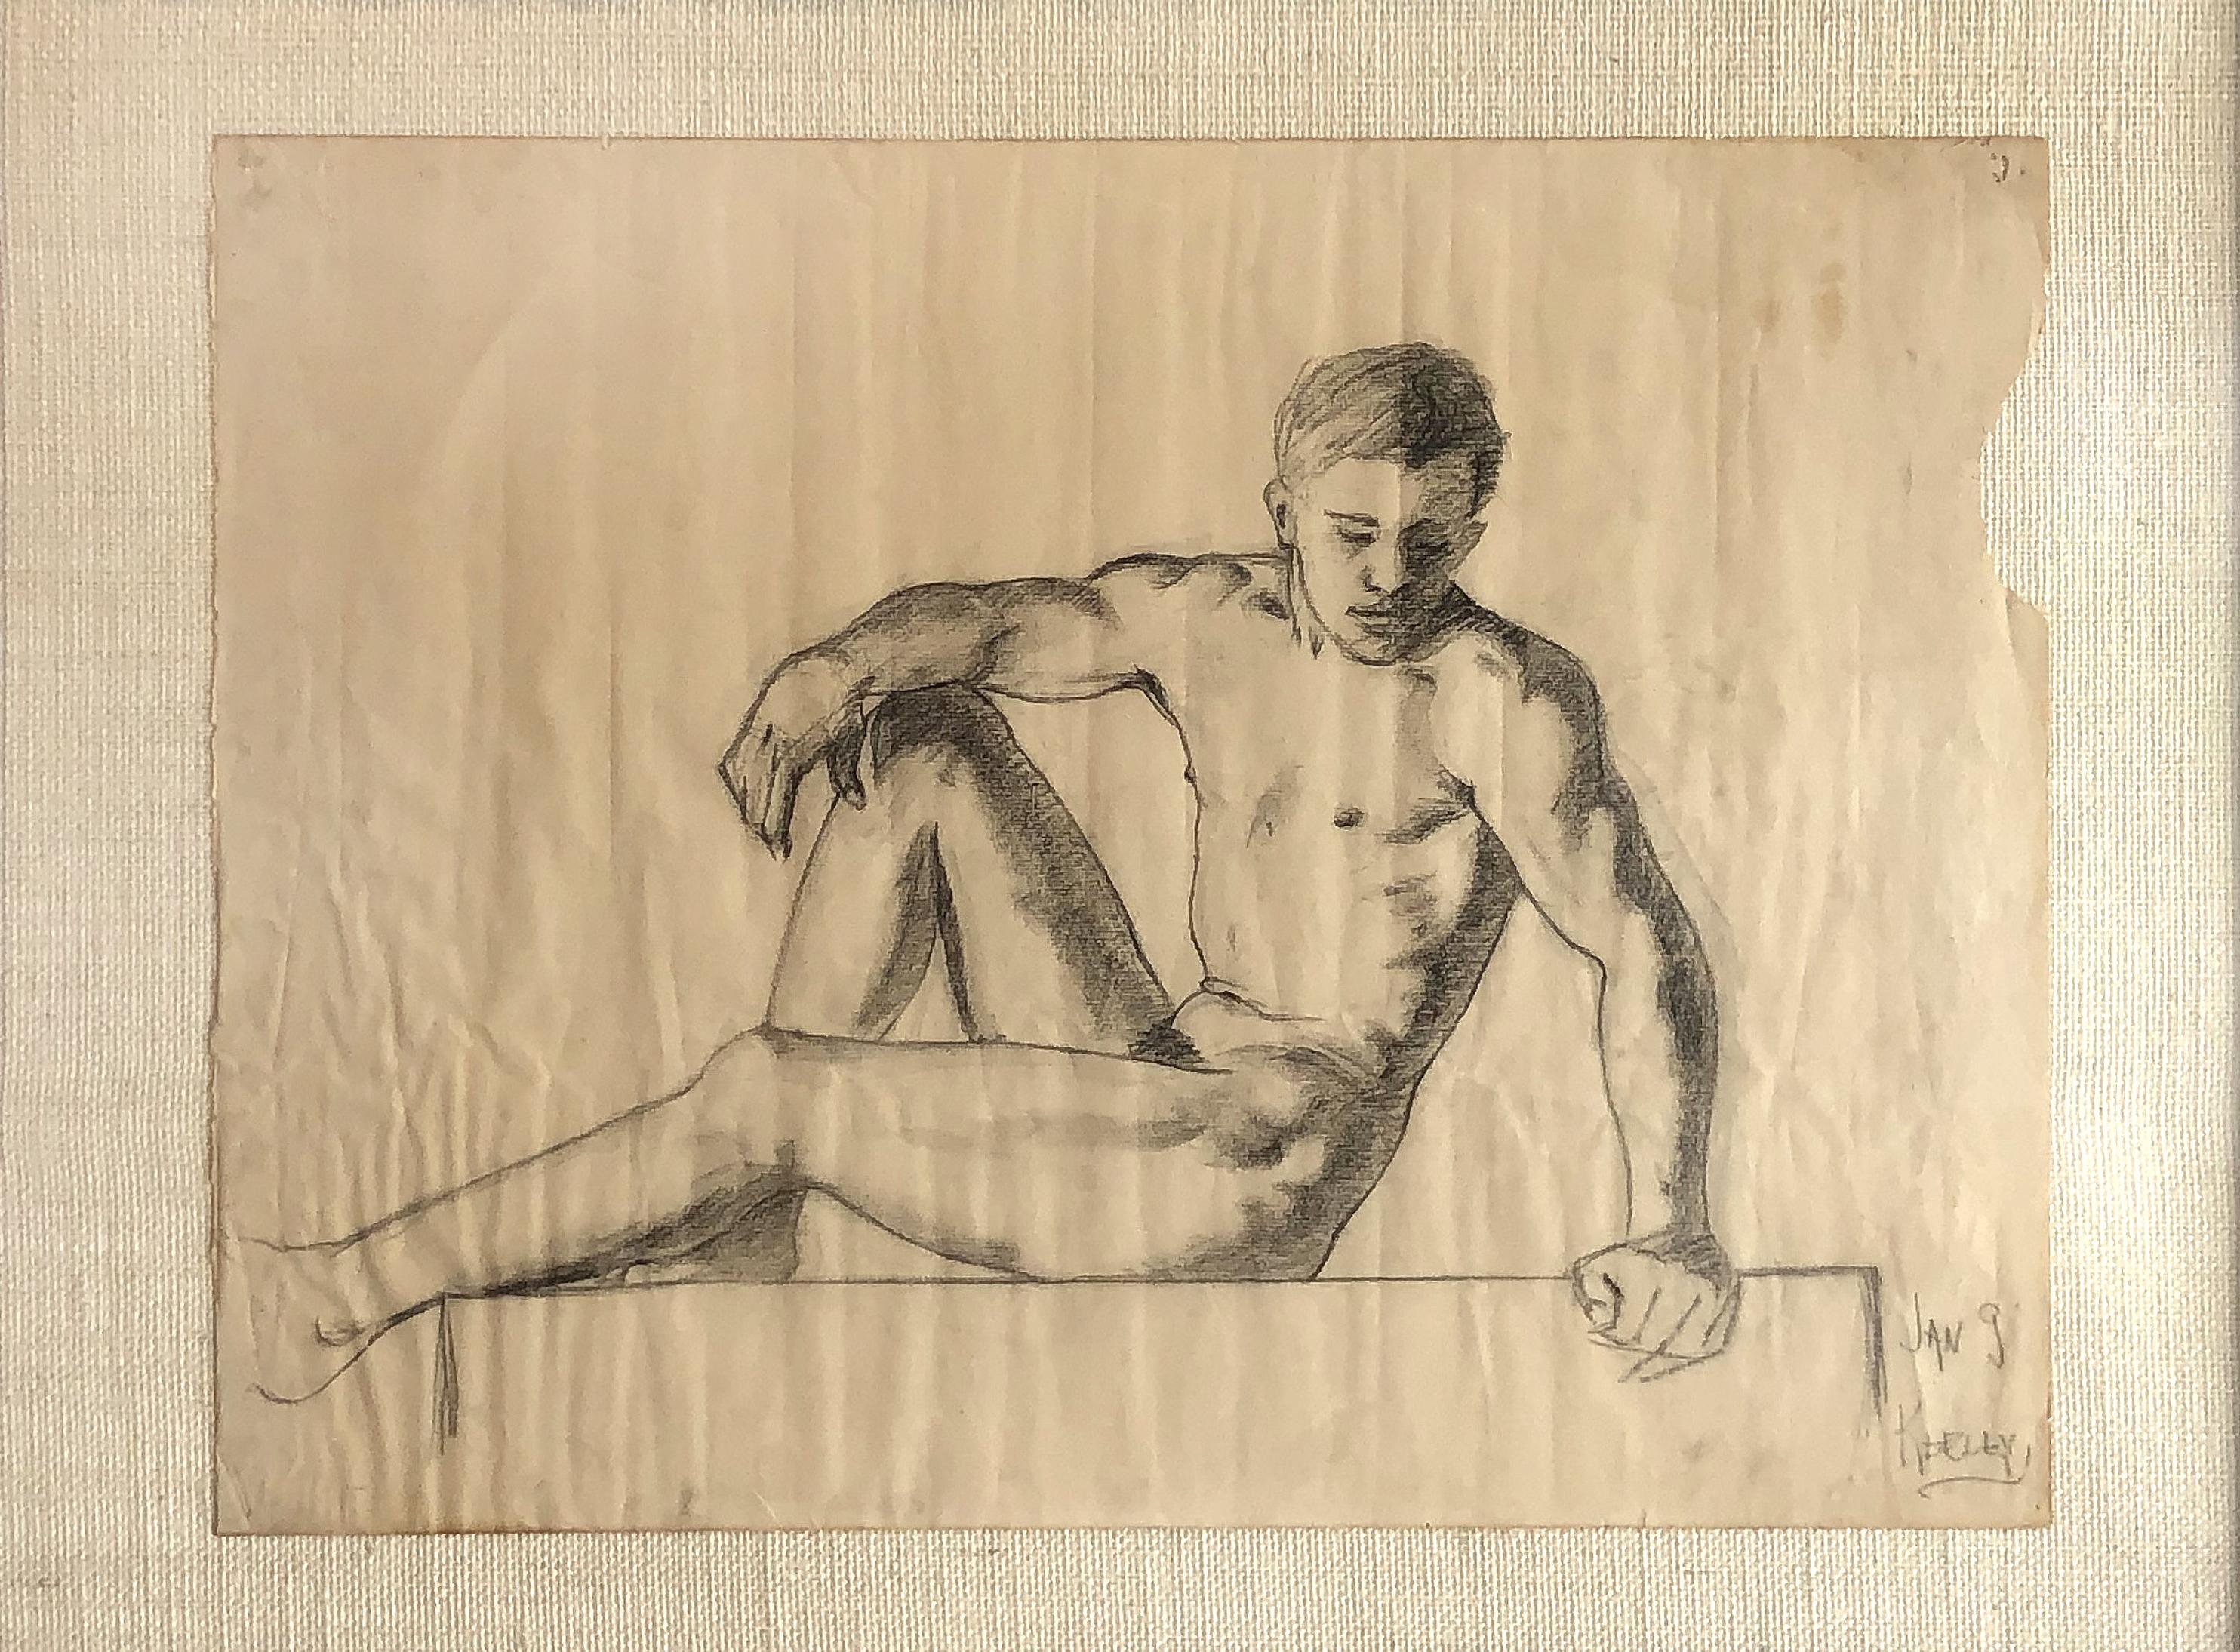 1940s classical male nude study pencil drawing

Offered for sale is a 1940s classical male nude study pencil drawing on paper. The original artist paper has been distressed and is float mounted upon a linen back-board. The drawing is been nicely